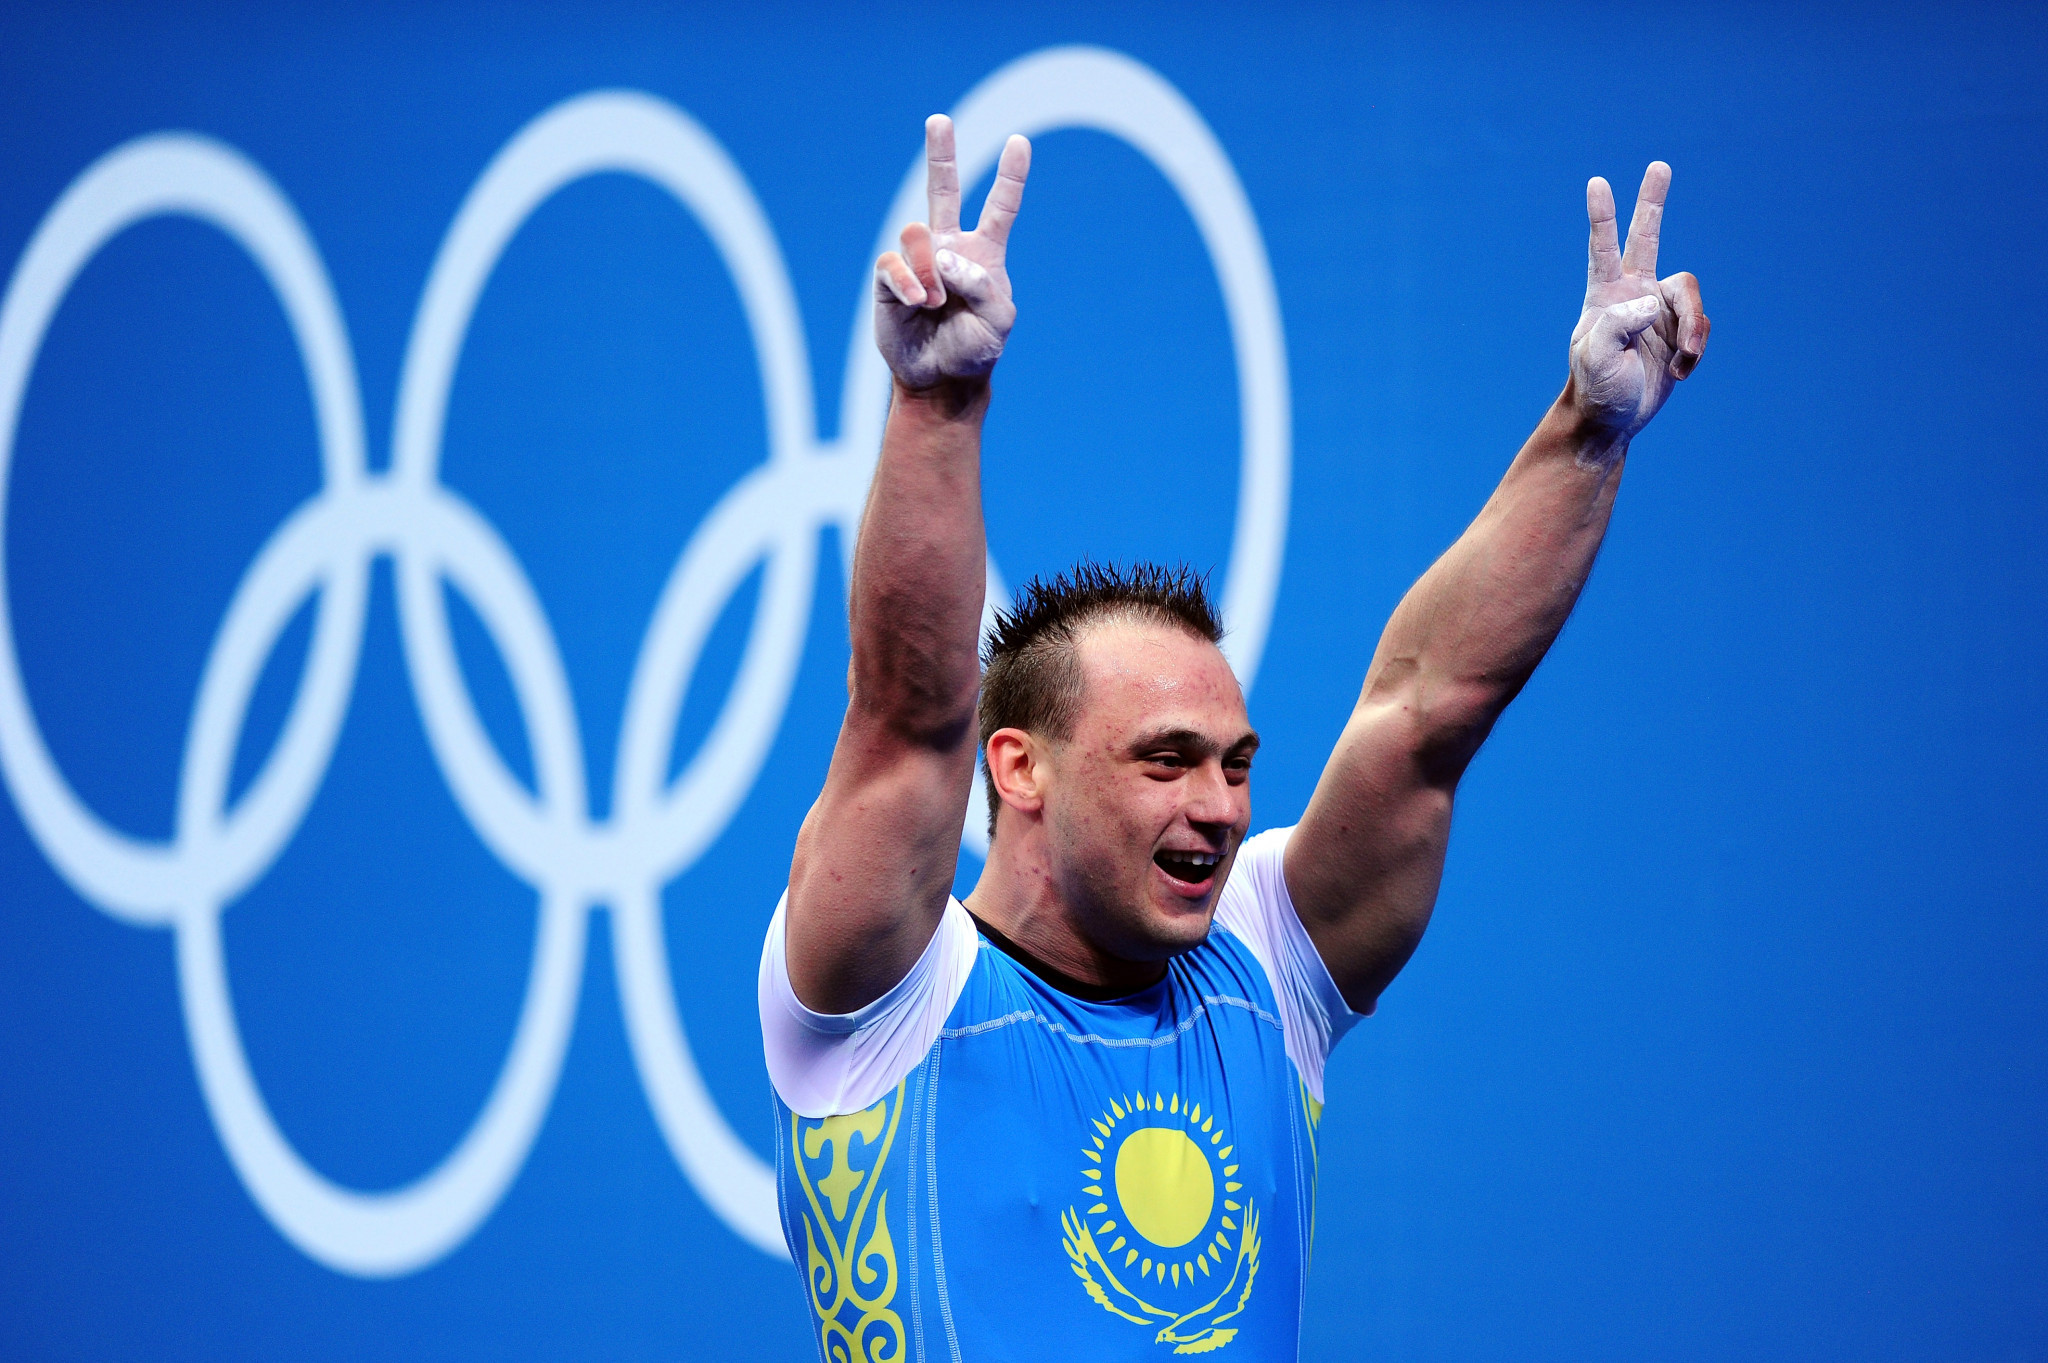 Ilya Ilyin has been stripped of both of his Olympic gold medals ©Getty Images